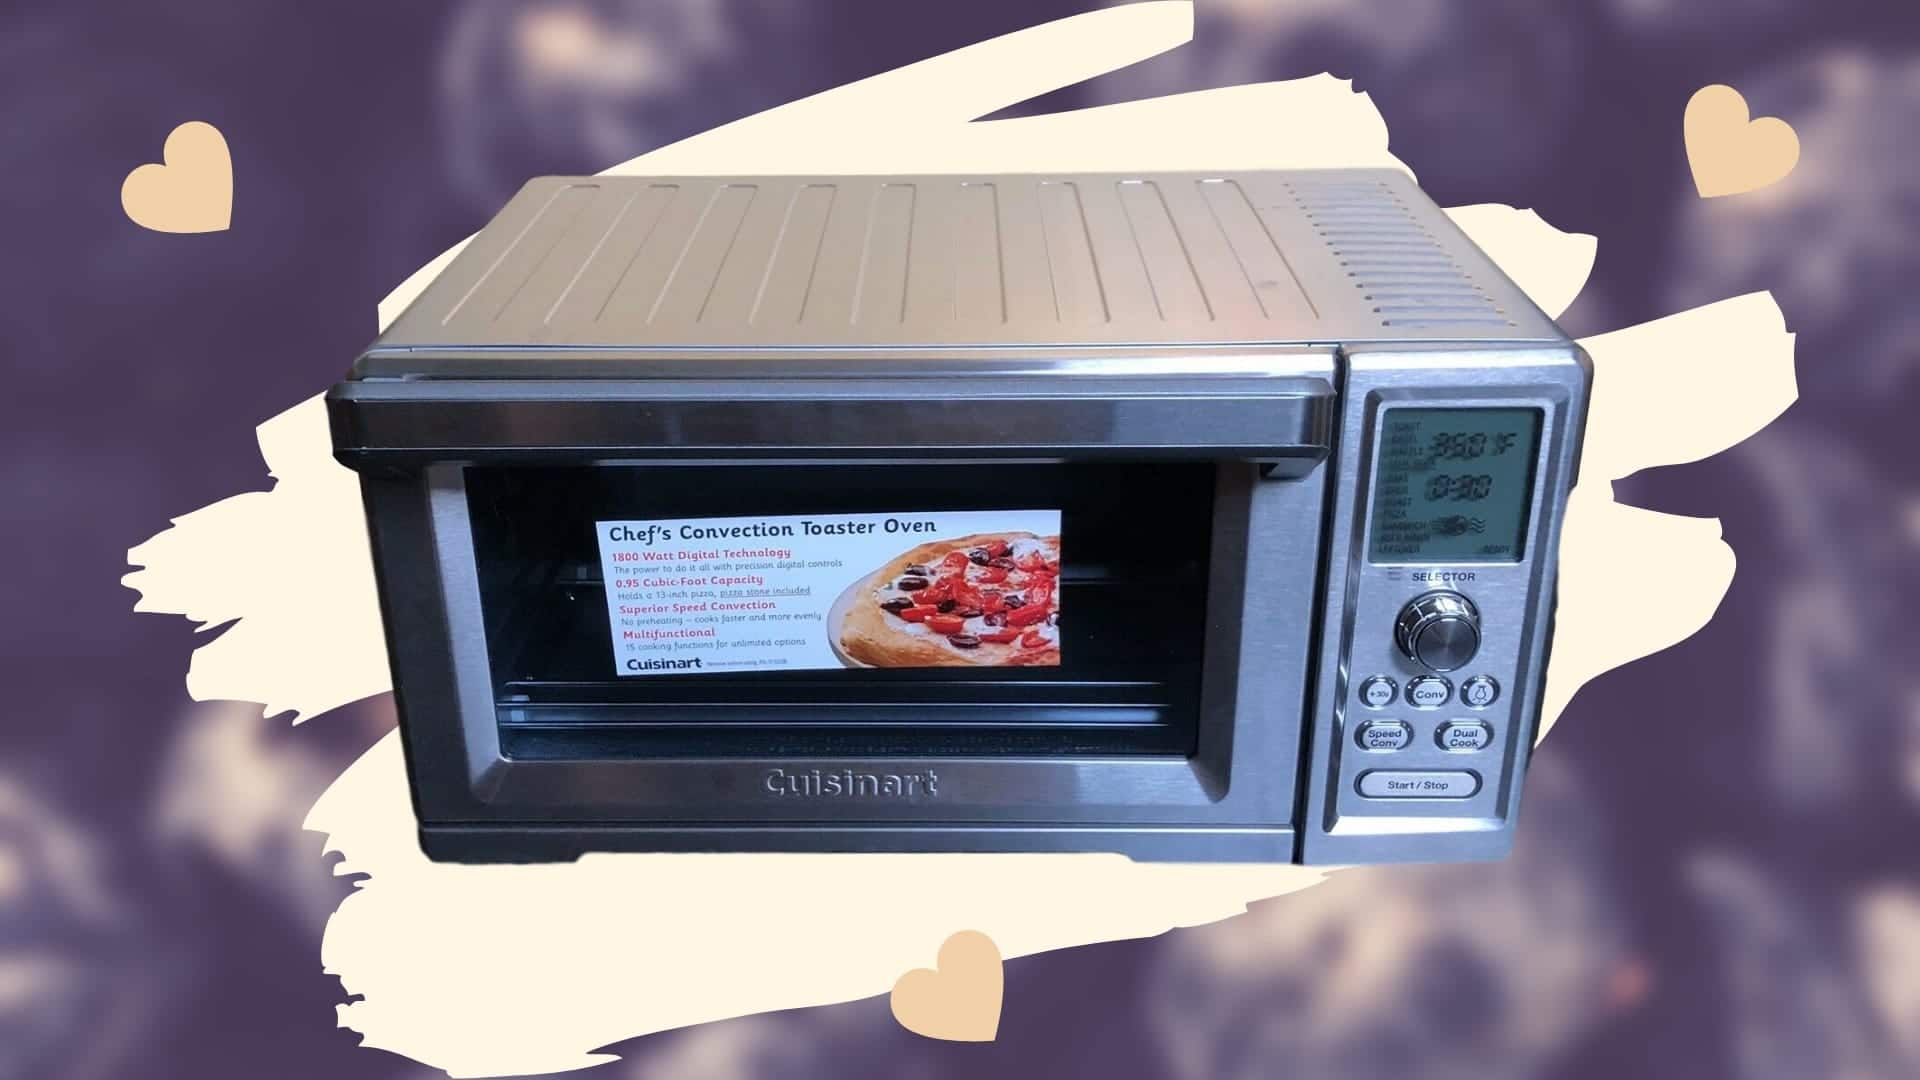 Cuisinart TOB 260N1 Toaster Oven featured image